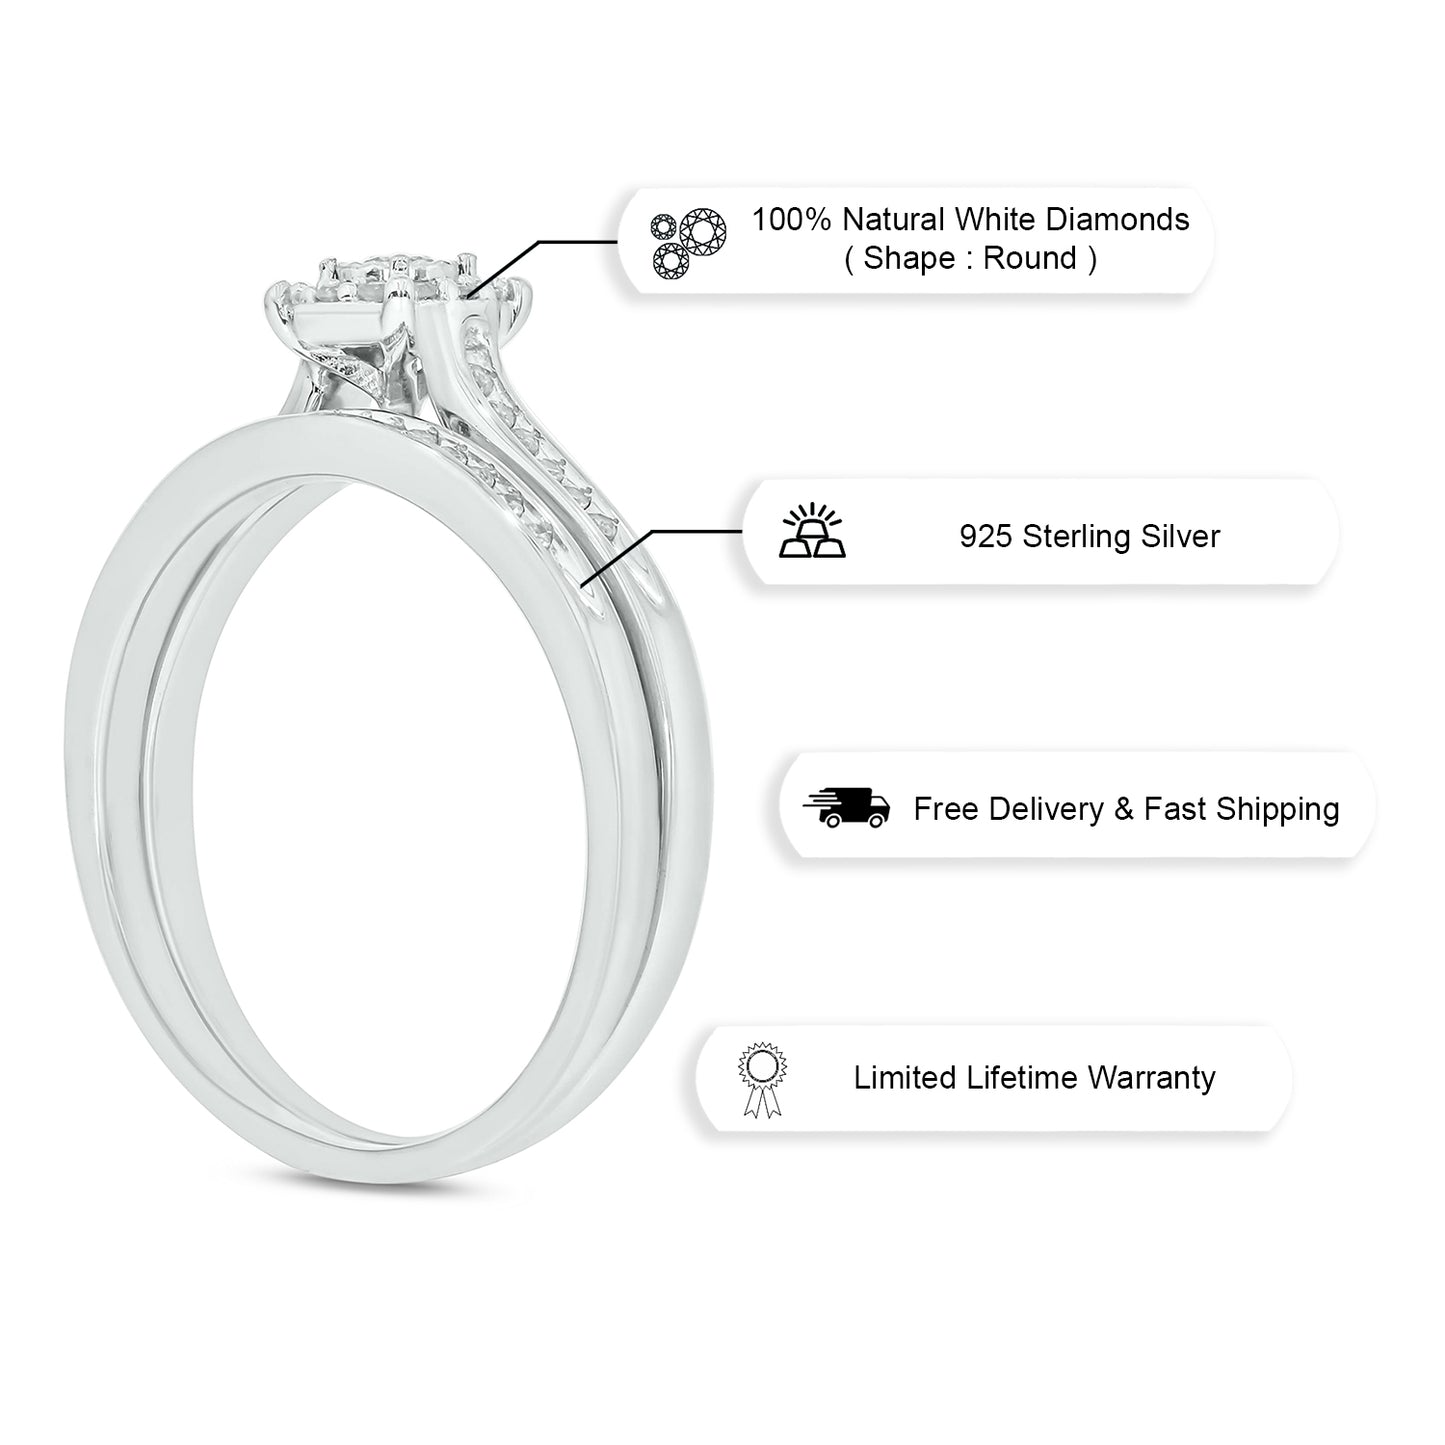 Classic Round Bridal Ring Set in Sterling Silver, Authentic Natural Diamonds